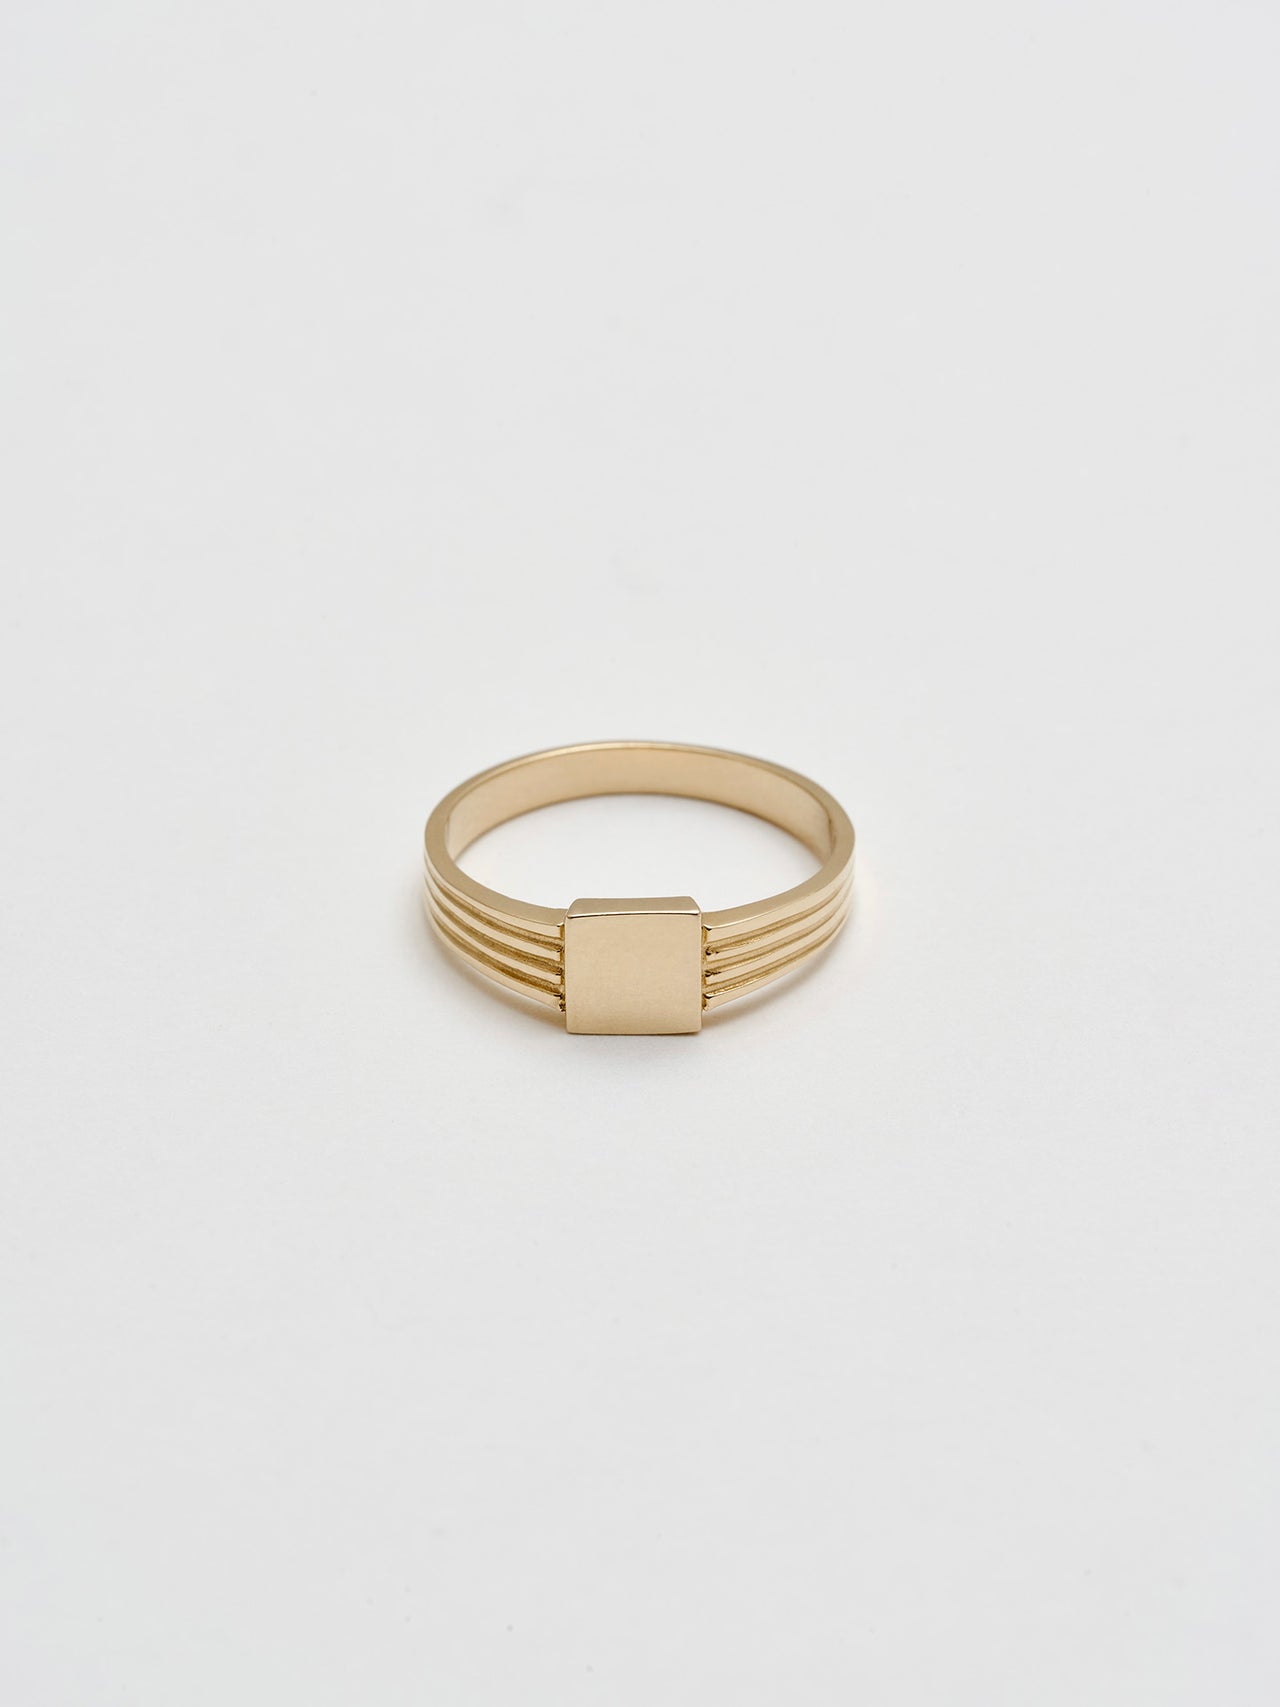 Mini Square ID Ring: 14kt Yellow Gold Ring with a 5mm Square ID Face and a 3.5mm to 2mm Tapered Band